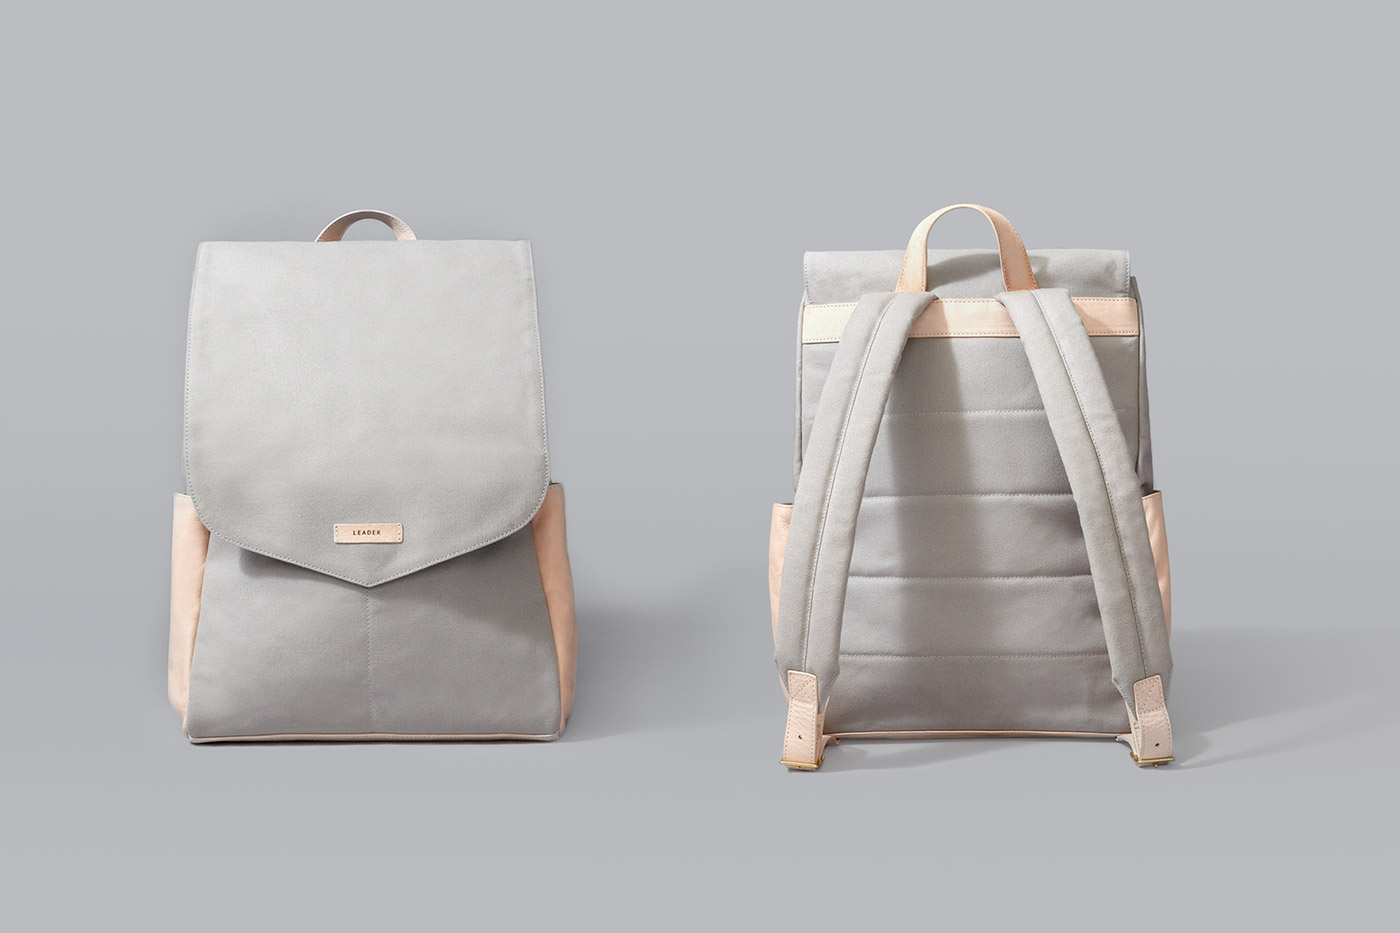 bags product design  art direction  canvas leader bag co leather setdesign accessories Fashion 